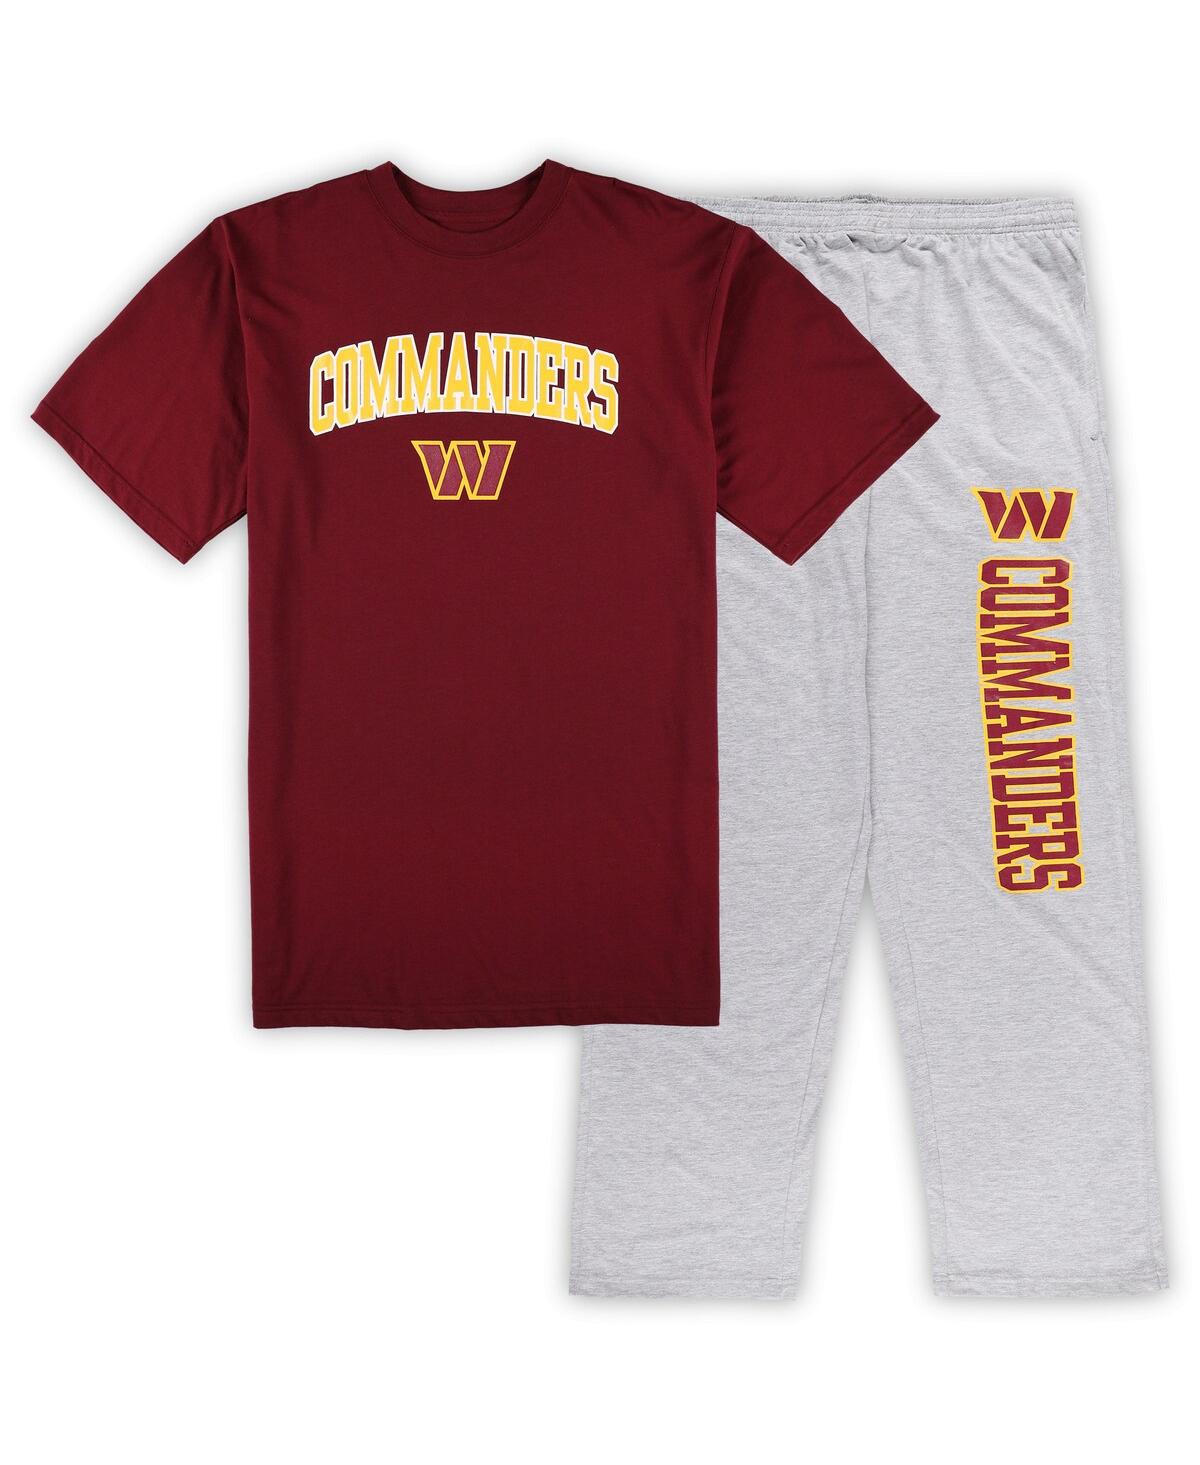 Men's Concepts Sport Burgundy, Heather Gray Washington Commanders Big and Tall T-shirt and Pajama Pants Sleep Set - Burgundy, Heather Gray